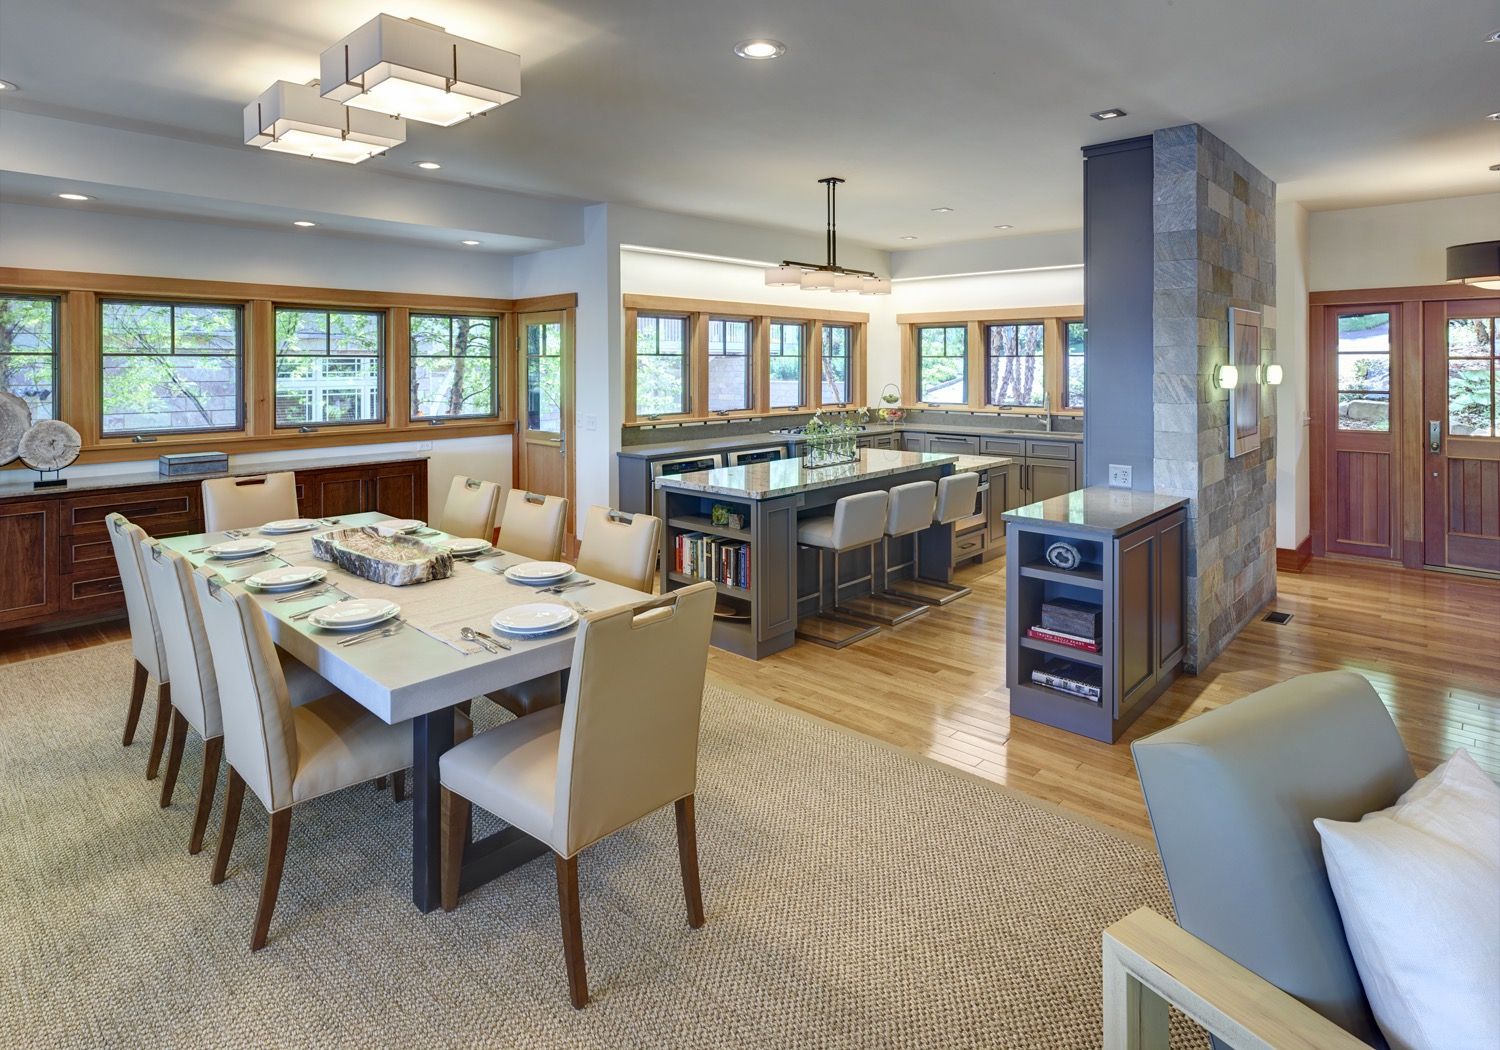 Contemporary Open Floor Plan Kitchen And Dining Room Combo (View 4 of 20)